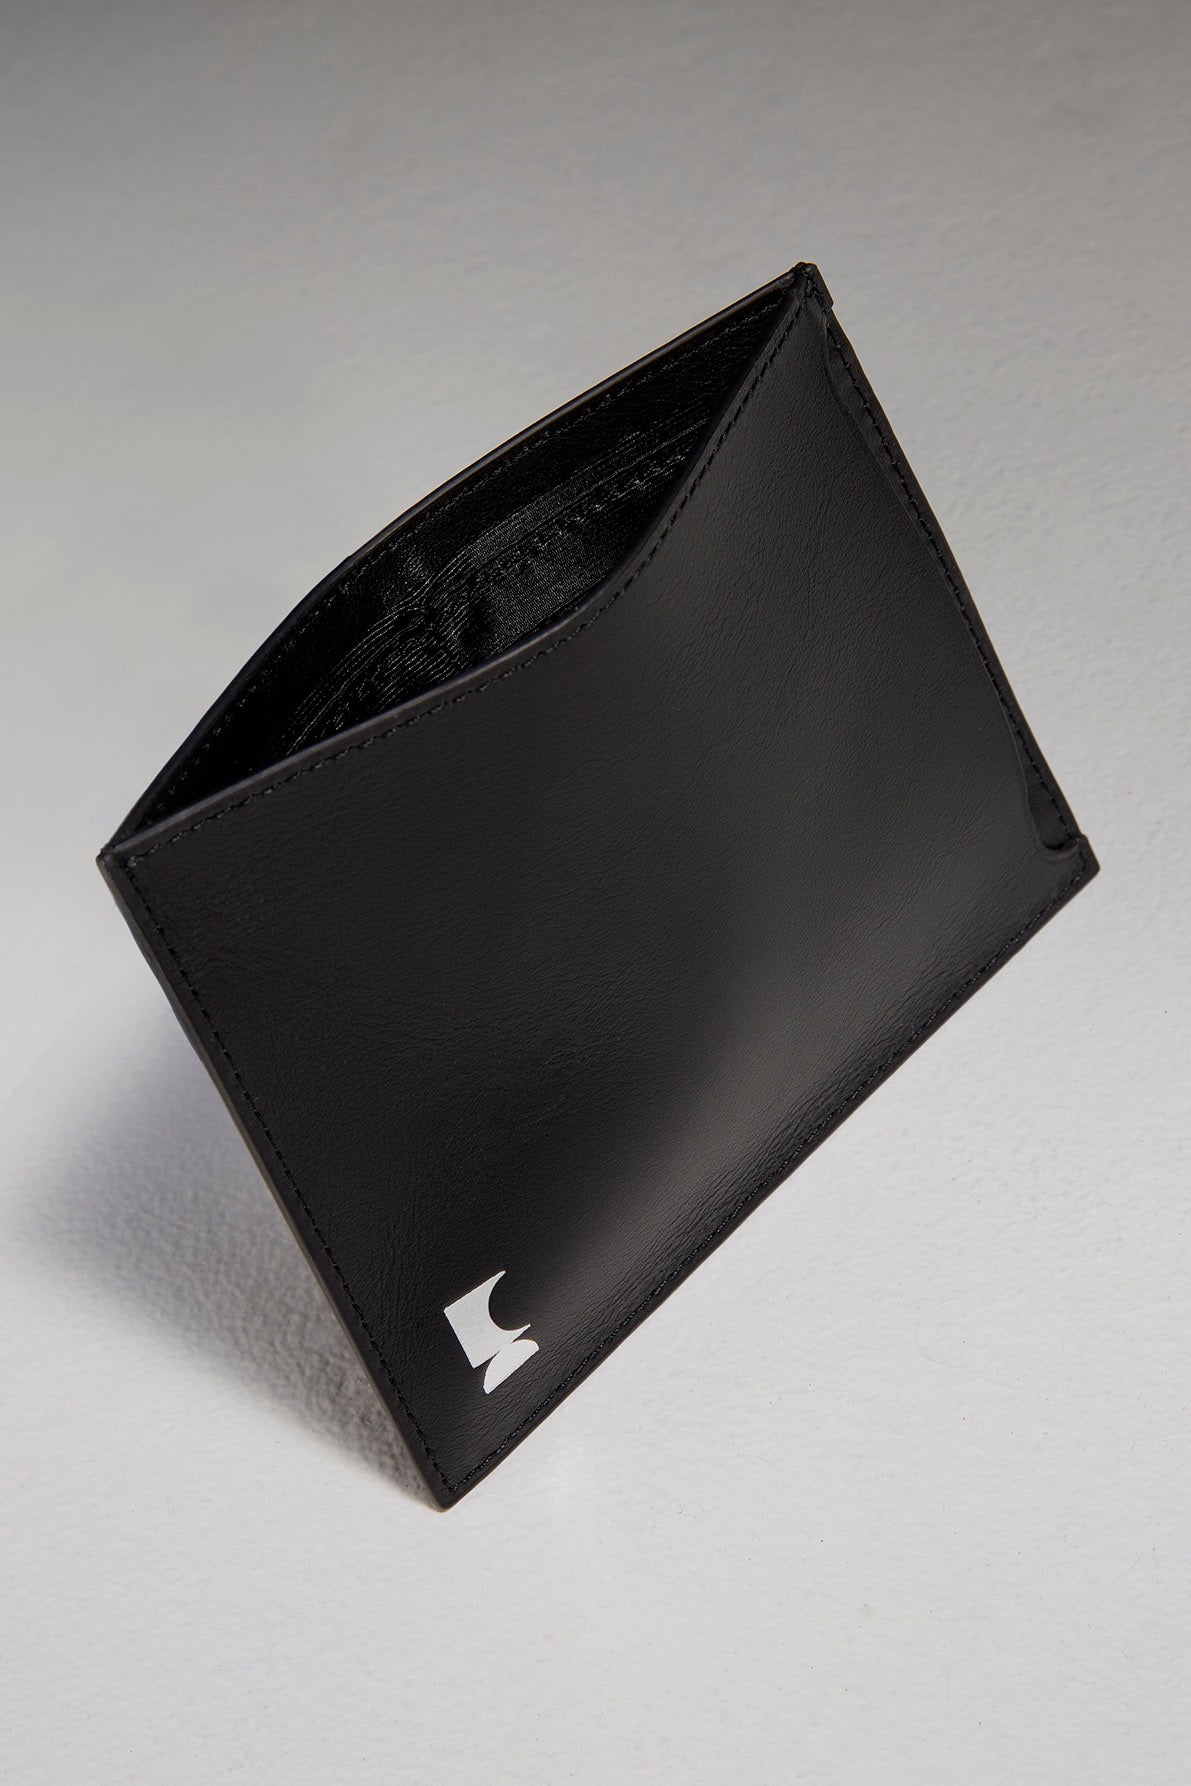 Black leather passport holder sitting in front of black backdrop with its top opened